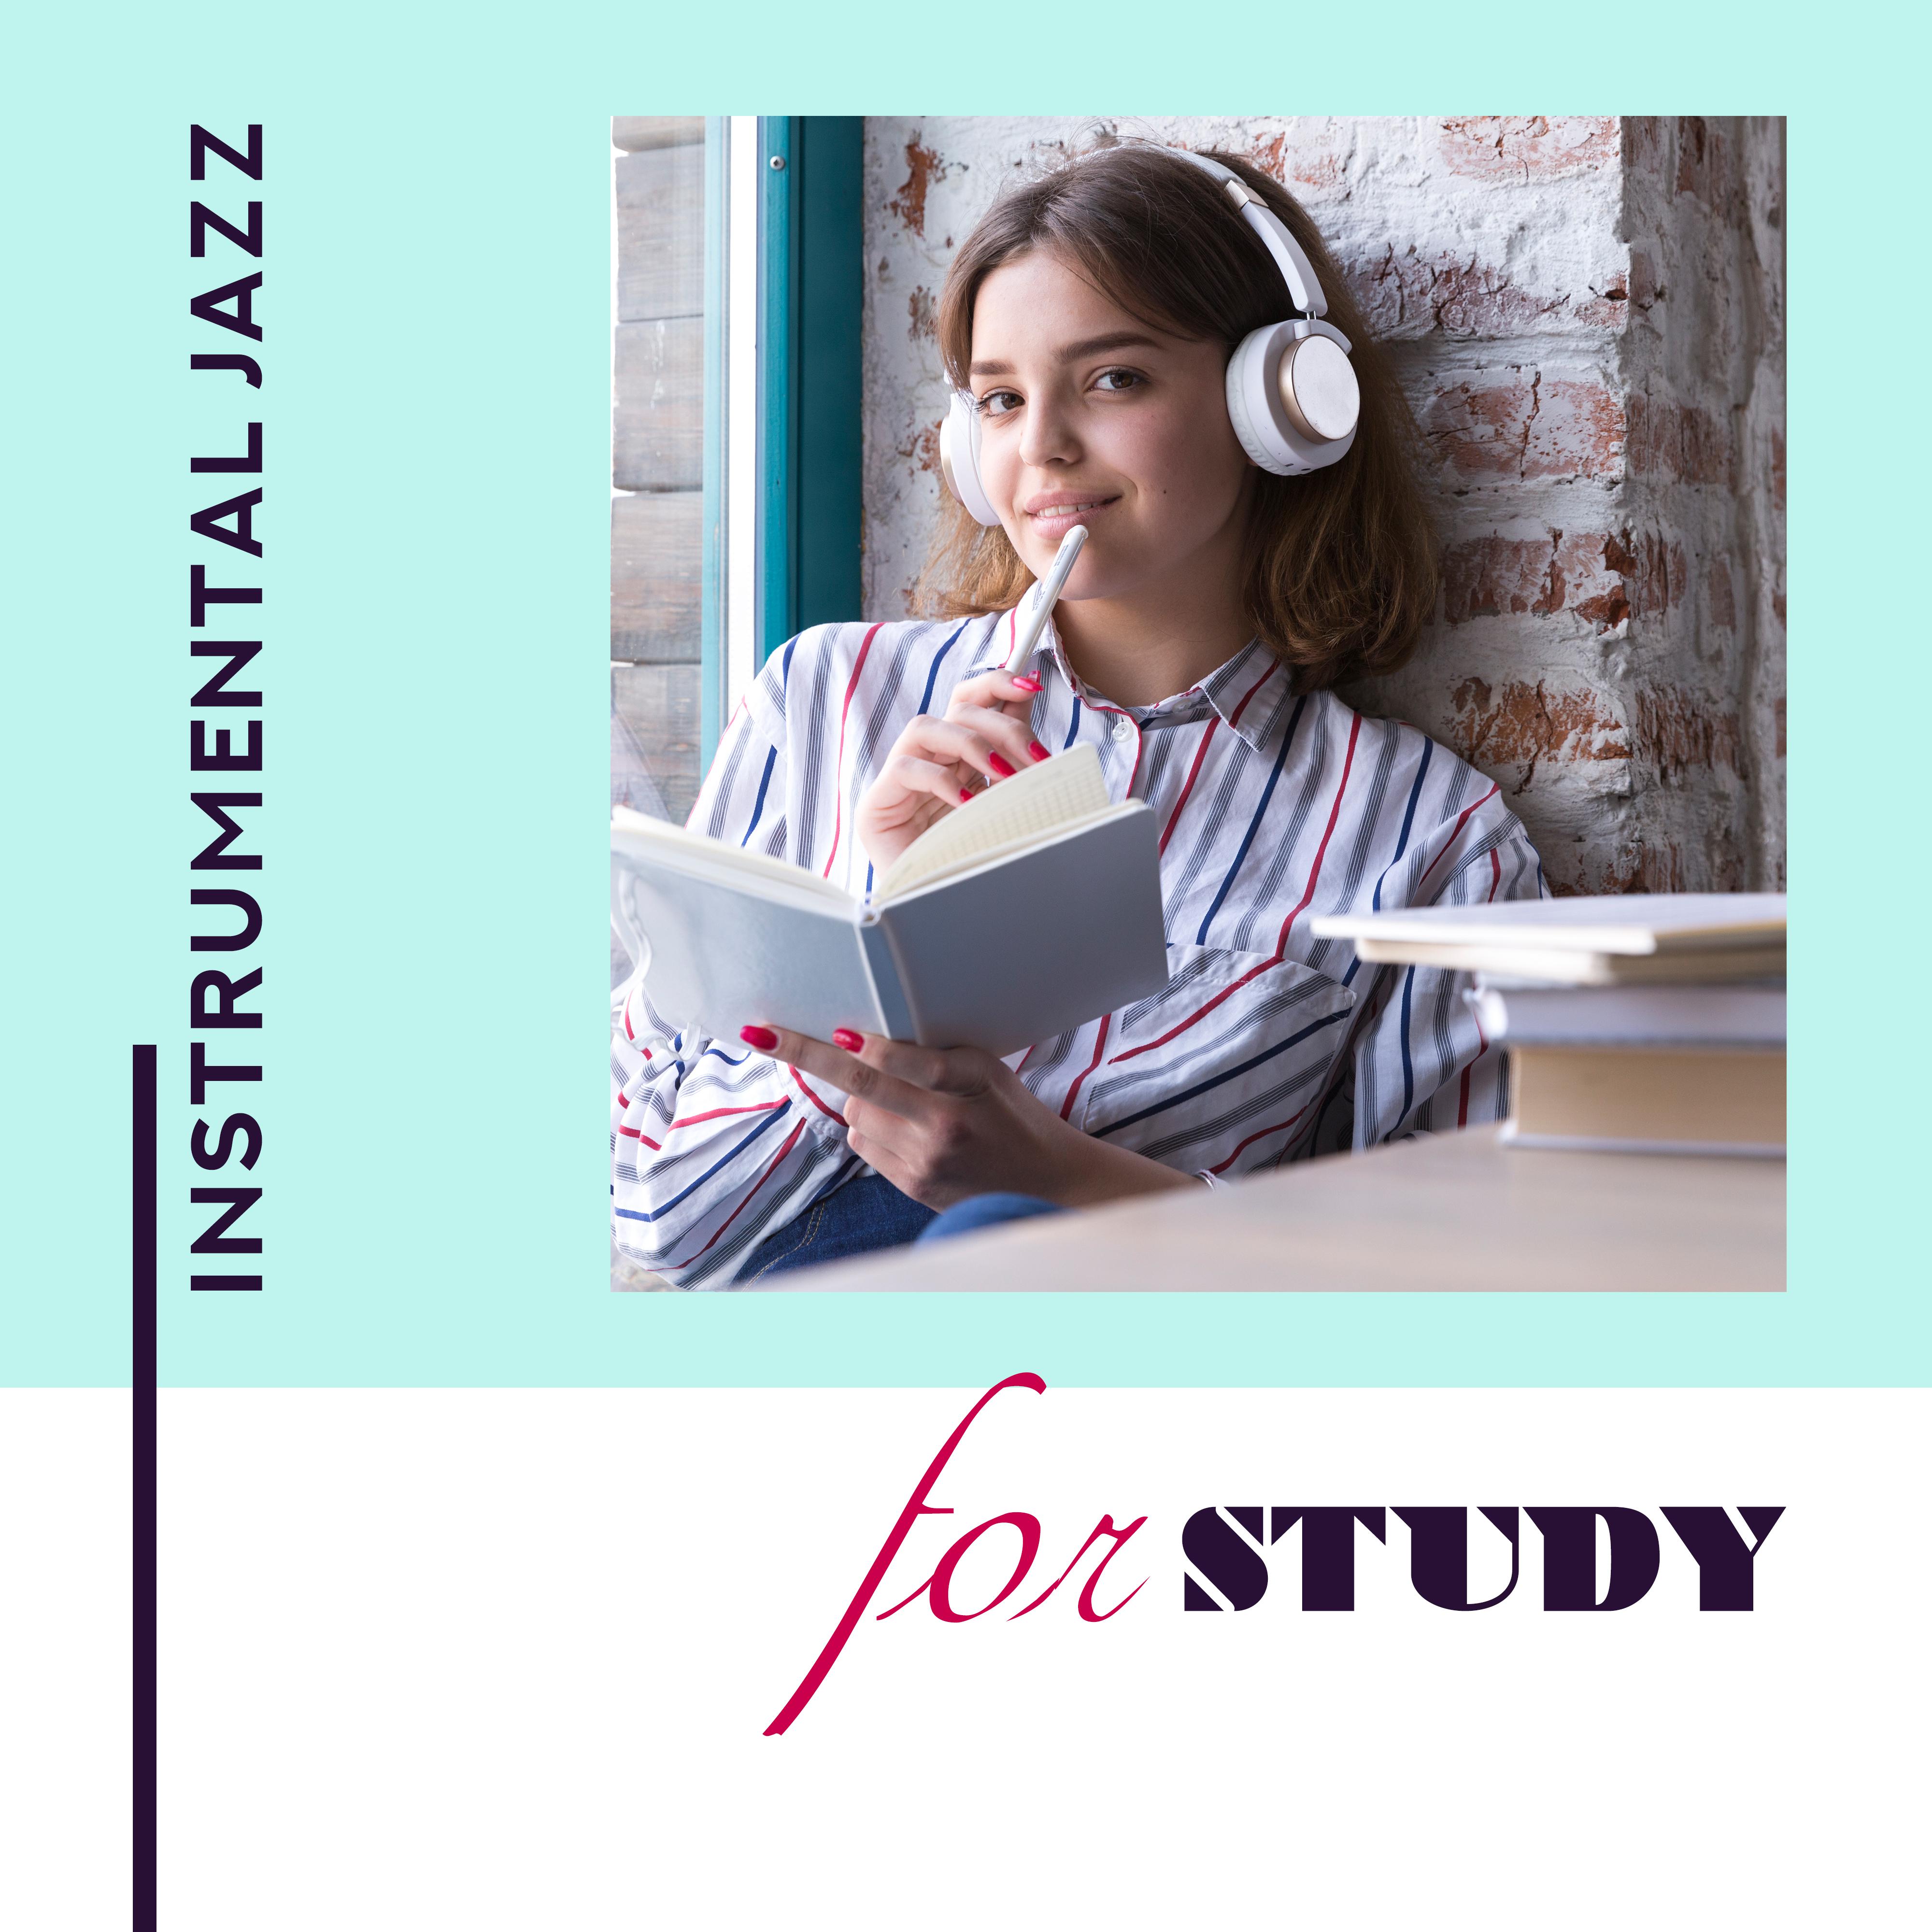 Instrumental Jazz for Study – Jazz Relaxation, Piano Music, Reduce Stress, Jazz for Deep Concentration, Reading Music, Calm Down